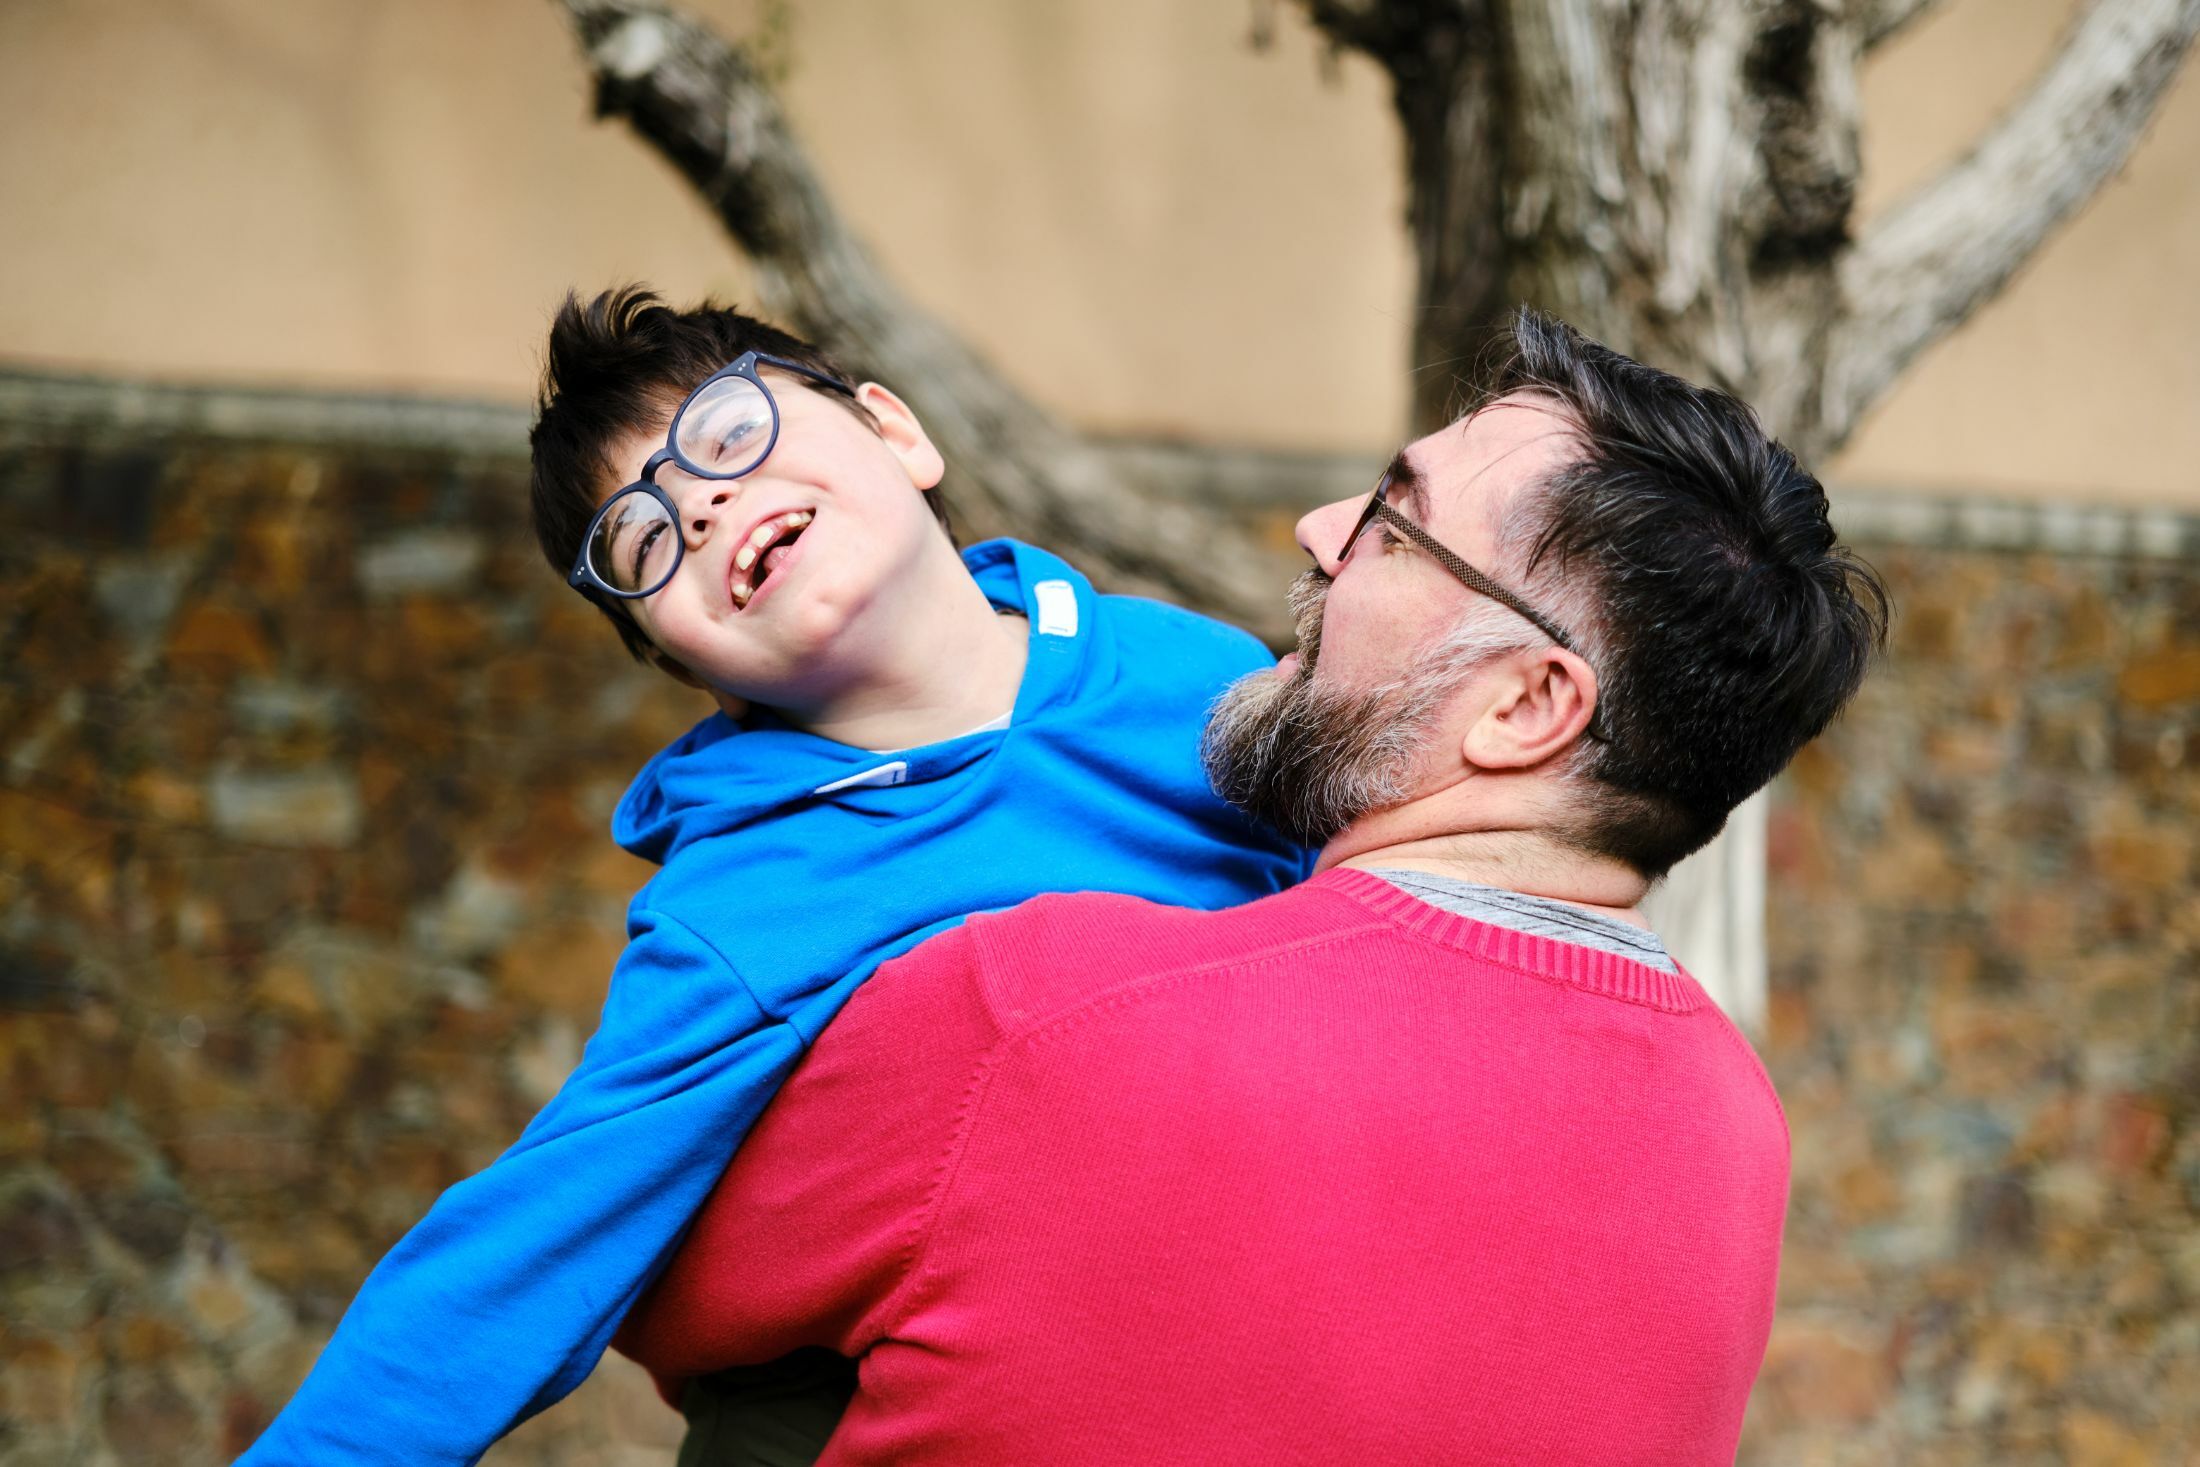 Young person with carer or carer